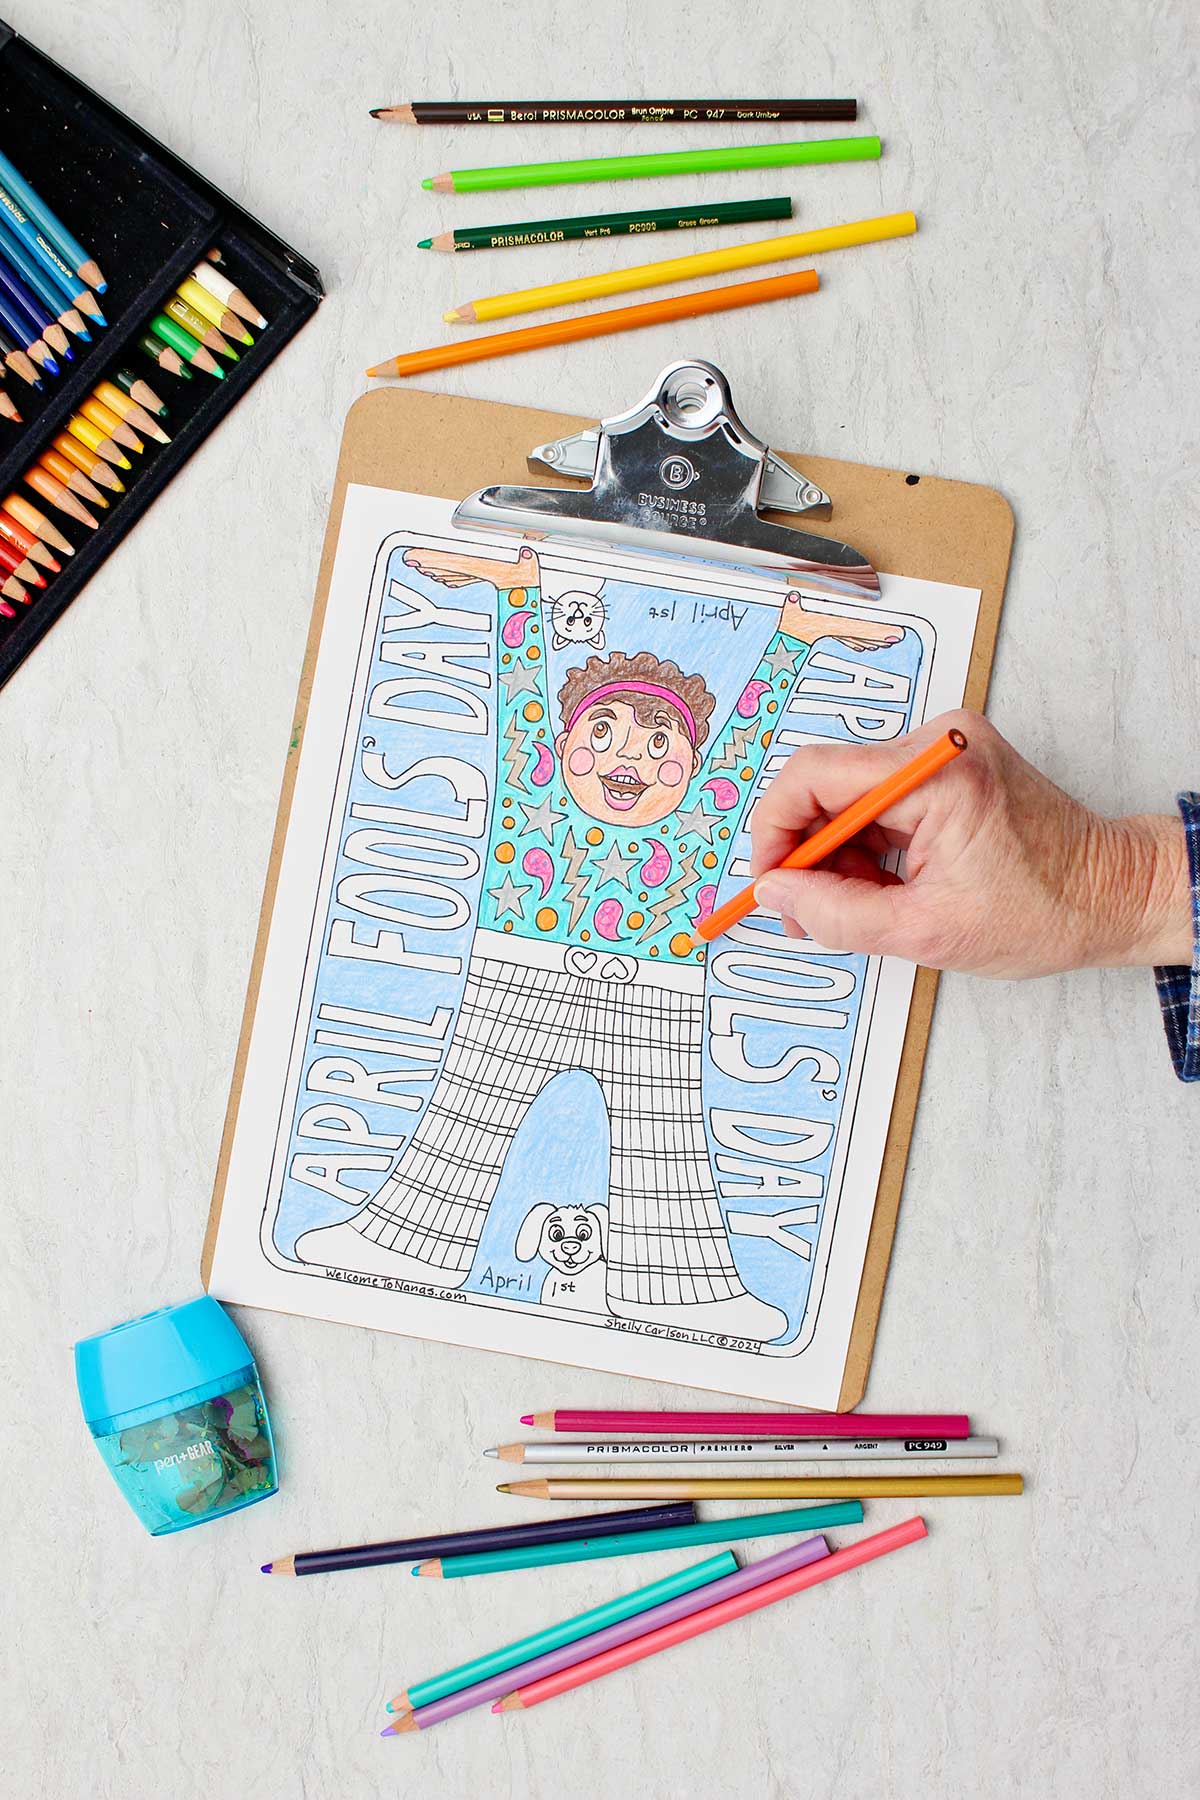 Hand coloring details in shirt orange in April Fools Coloring Page clipped in clip board with colored pencils around.